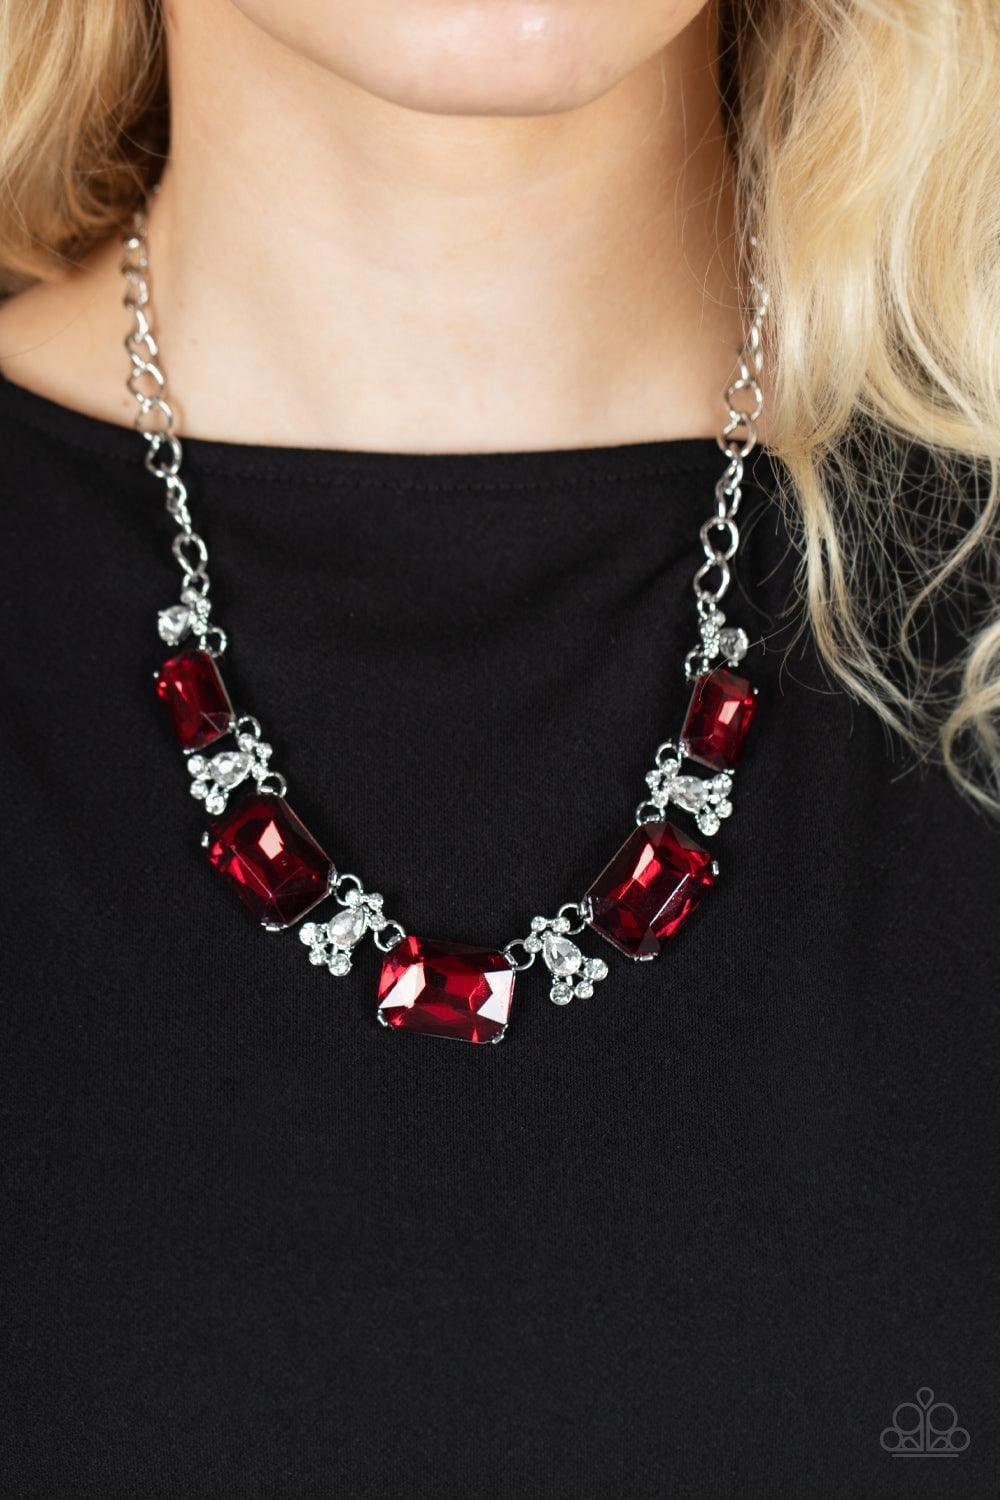 Paparazzi Accessories - Flawlessly Famous - Red Necklace - Bling by JessieK